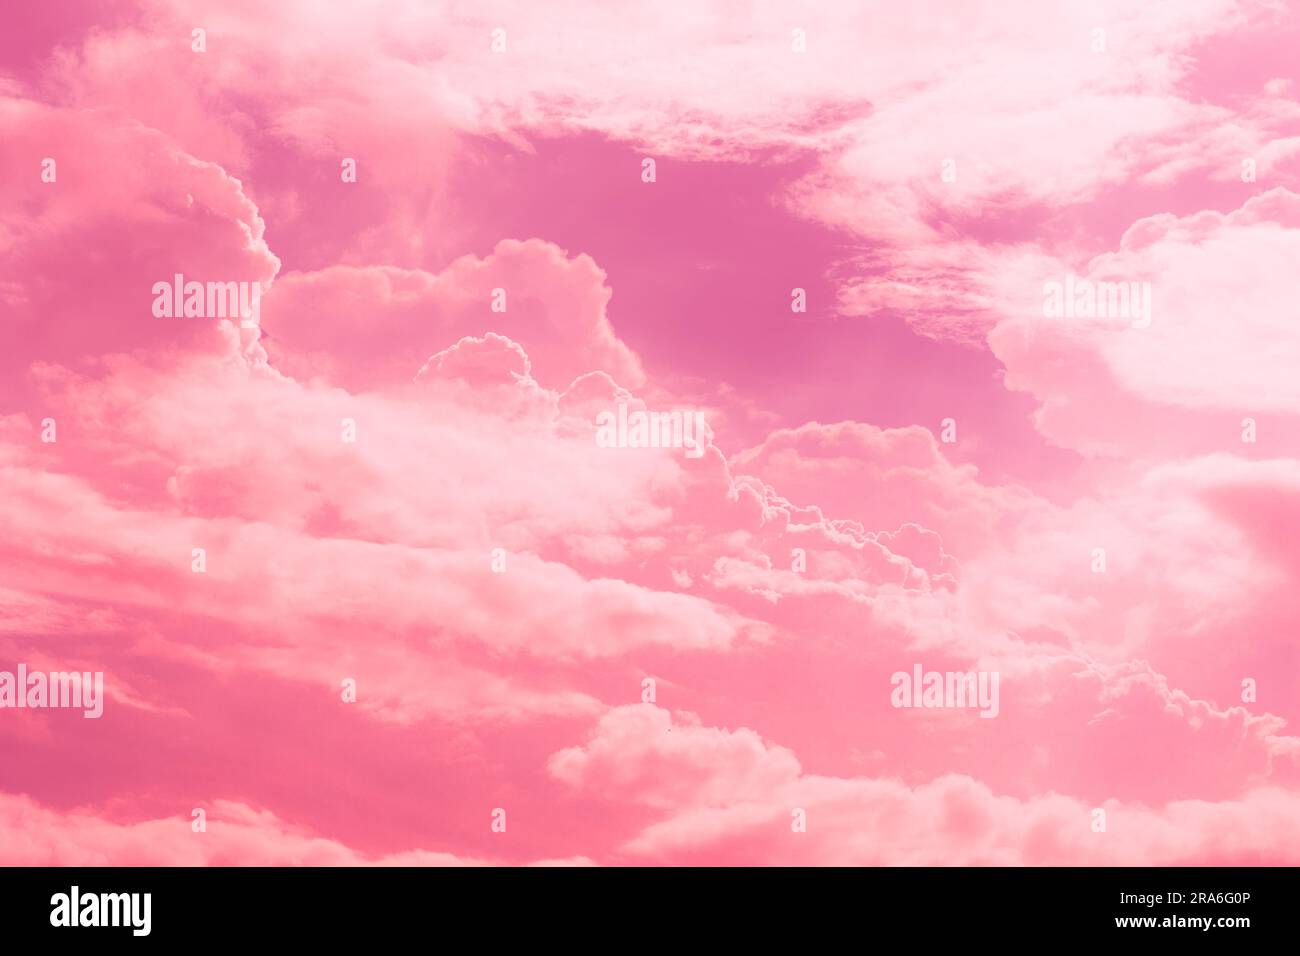 Pink sky cloud. Heaven place of sweet love pink red color tone for wedding card background. Stock Photo